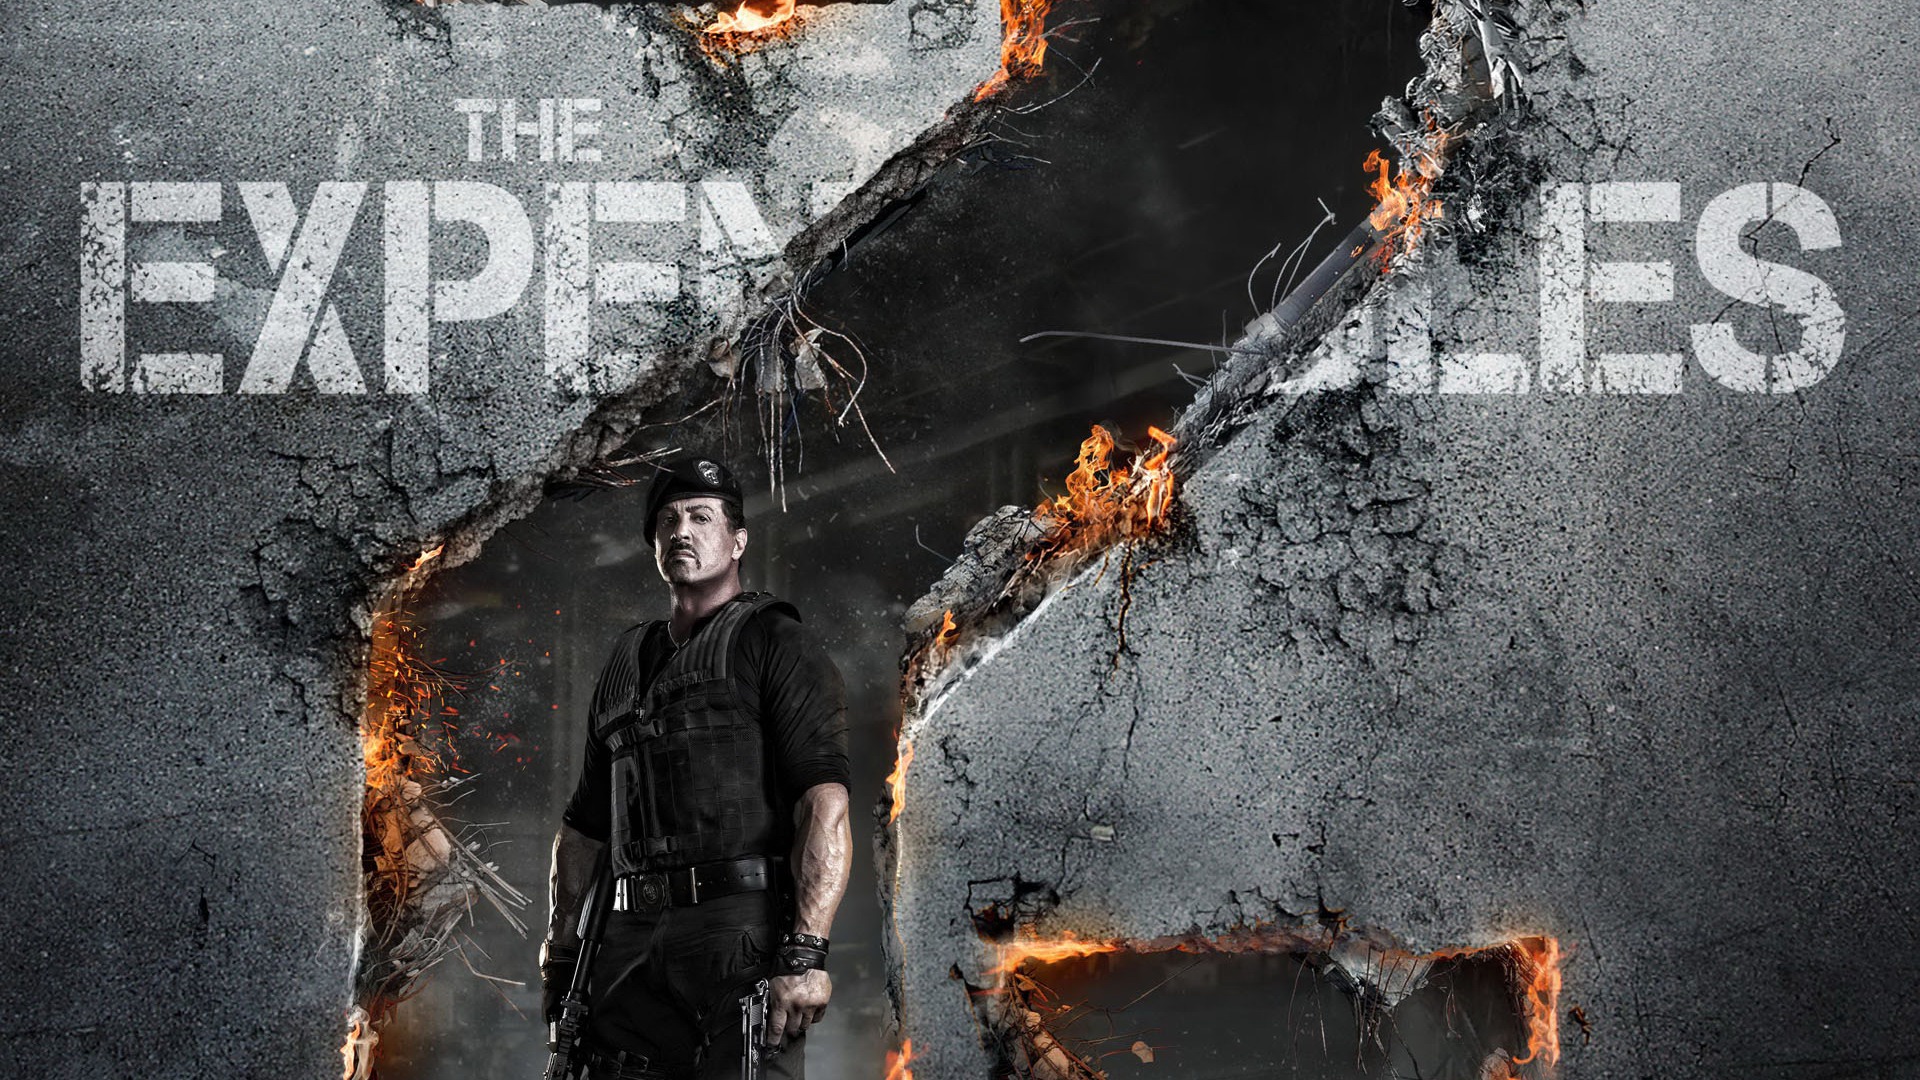 2012 The Expendables 2 敢死队2 高清壁纸2 - 1920x1080